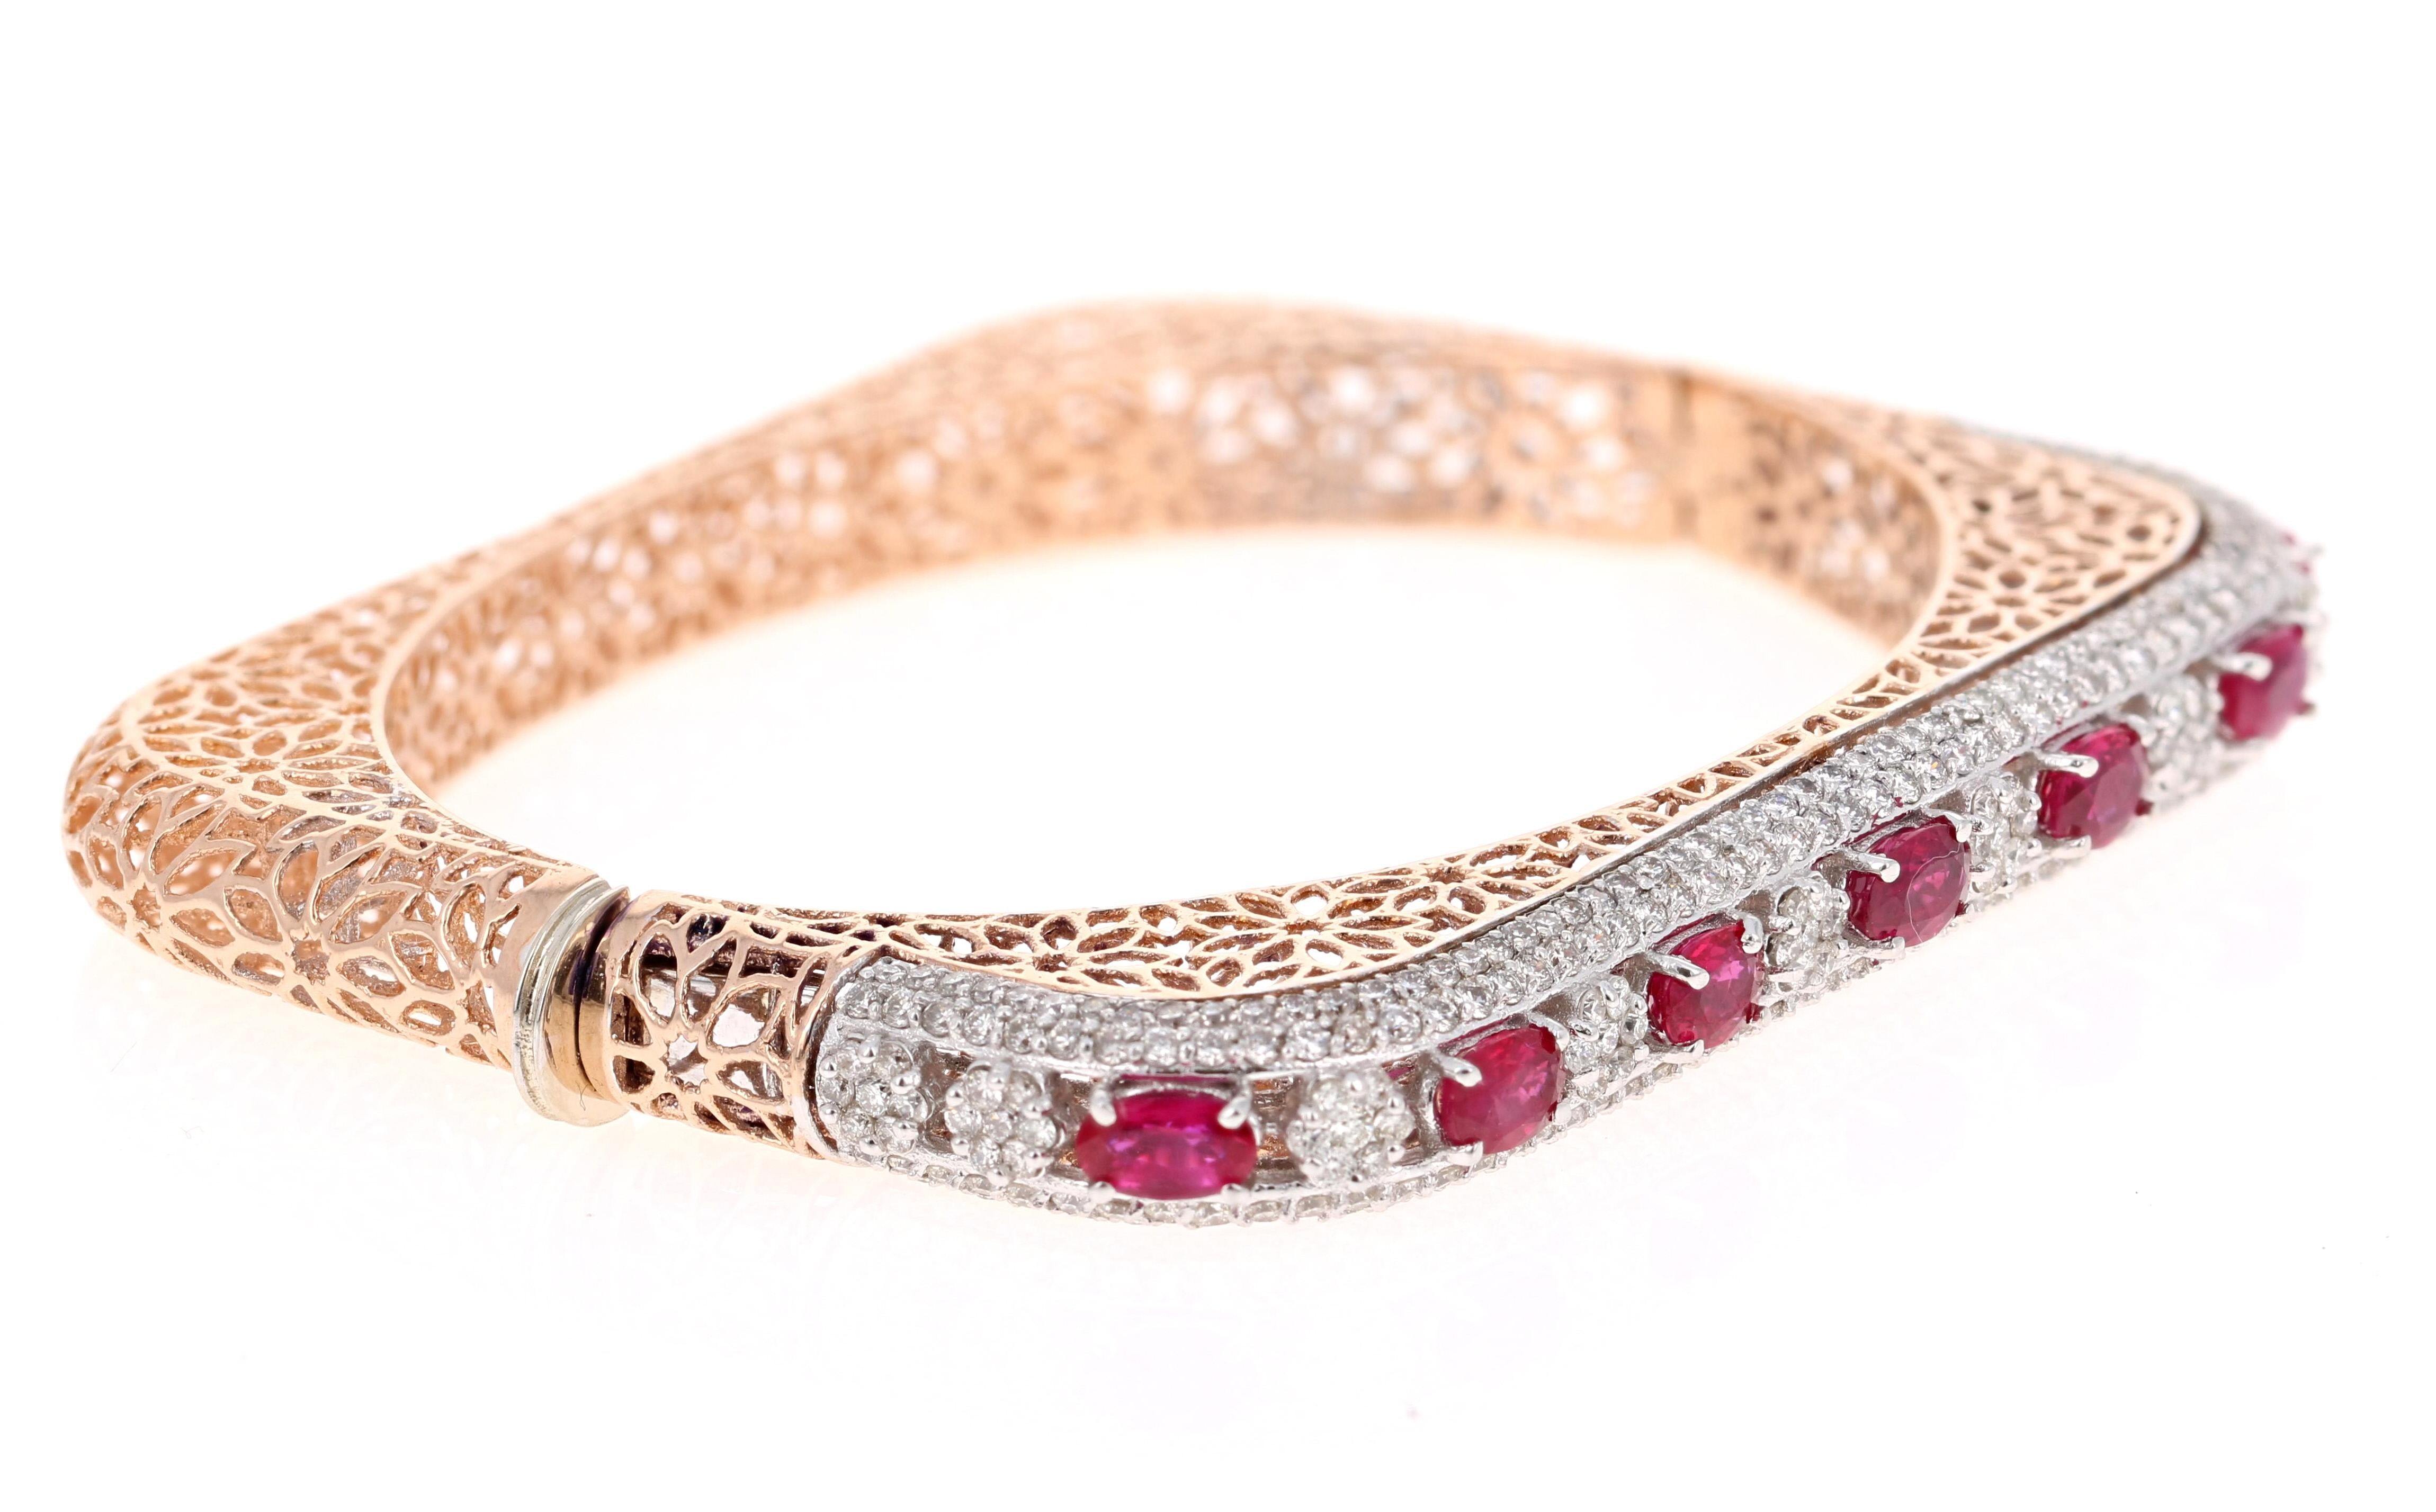 Stunning Statement Ruby Diamond Bangle! 

This Bracelet has 7 Natural Oval Cut Rubies that weigh 2.94 Carats. It also has 308 Round Cut Diamonds that weigh 2.85 Carats. The total carat weight of the bracelet is 5.79 Carats. (Clarity: VS, Color: